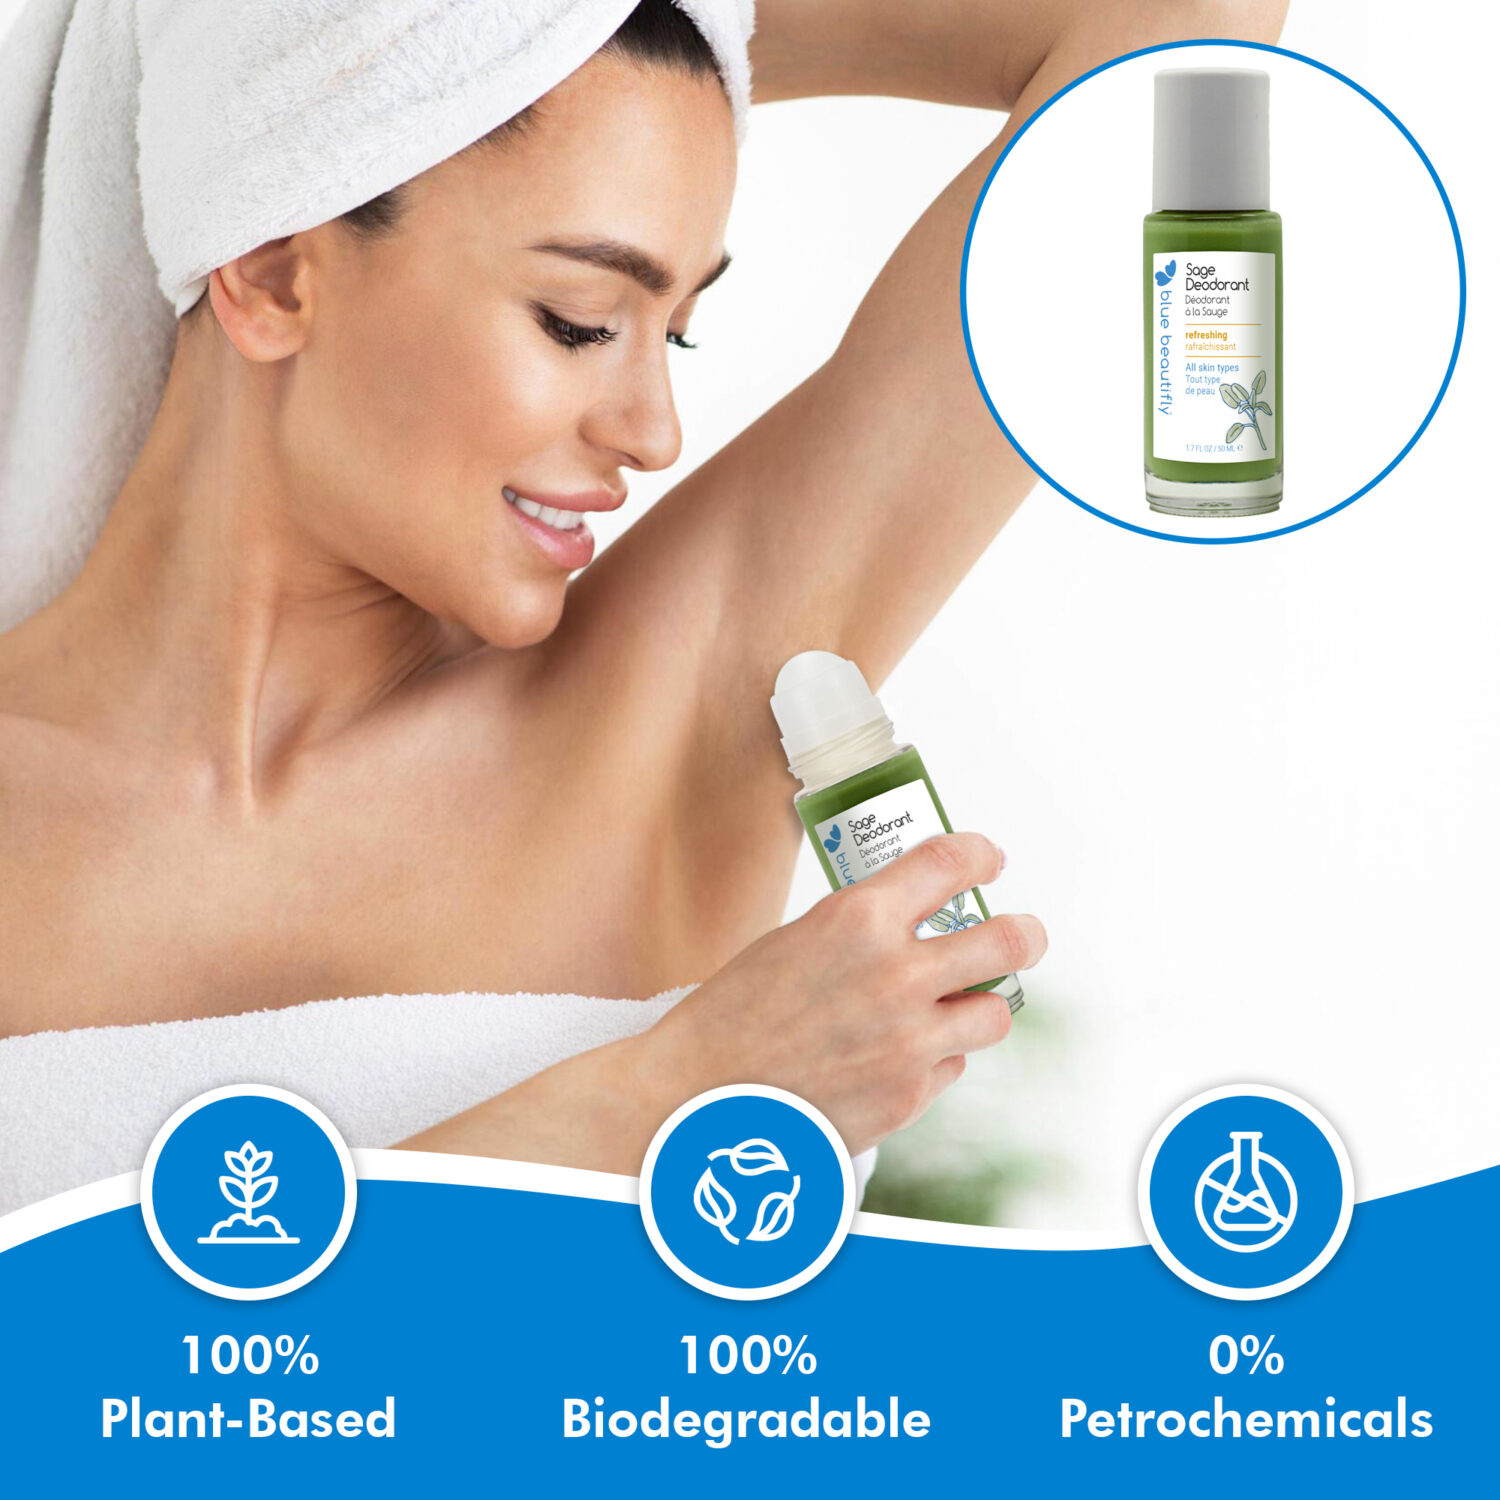 Blue Beautifly Sage Deodorant is 100% plant-based and biodegradable and contains no petrochemicals or toxins